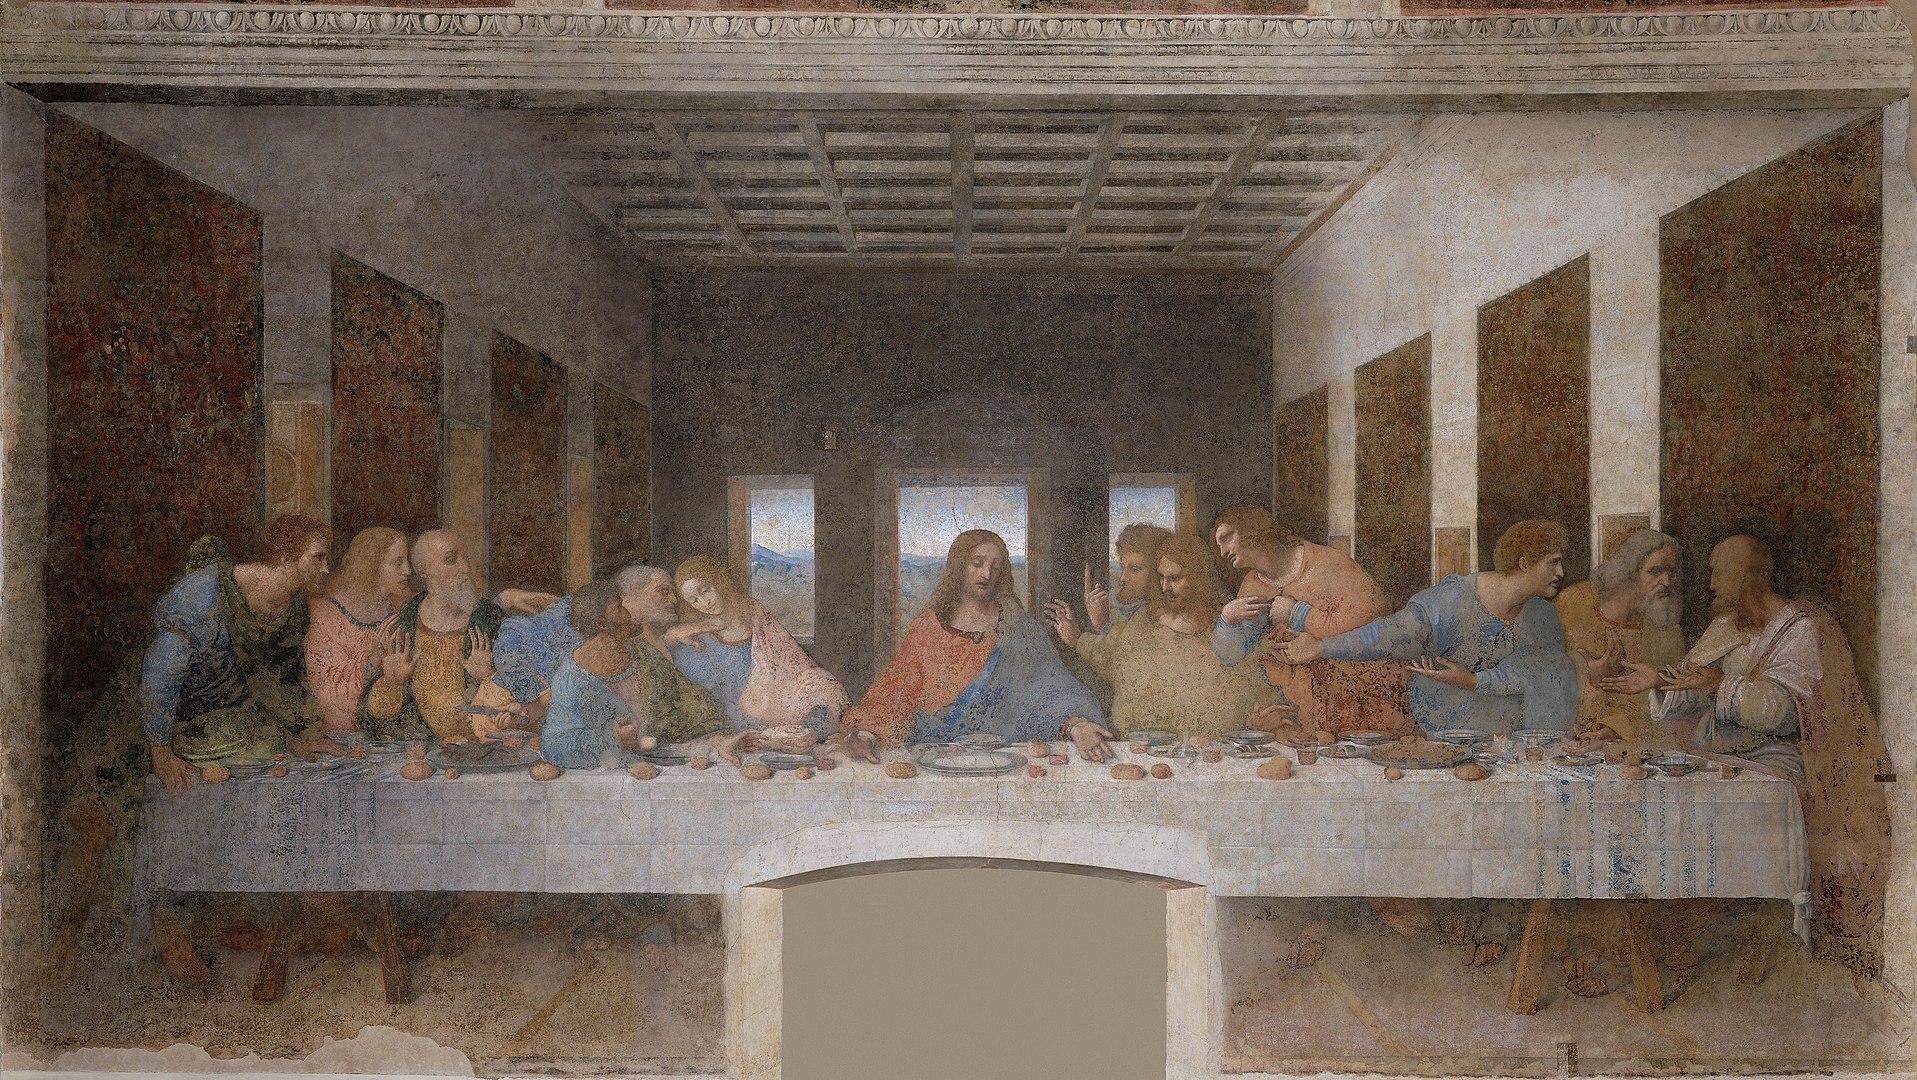 The Last Supper is a mural painting by the Italian High Renaissance artist Leonardo da Vinci, dated to c. 1495–1498